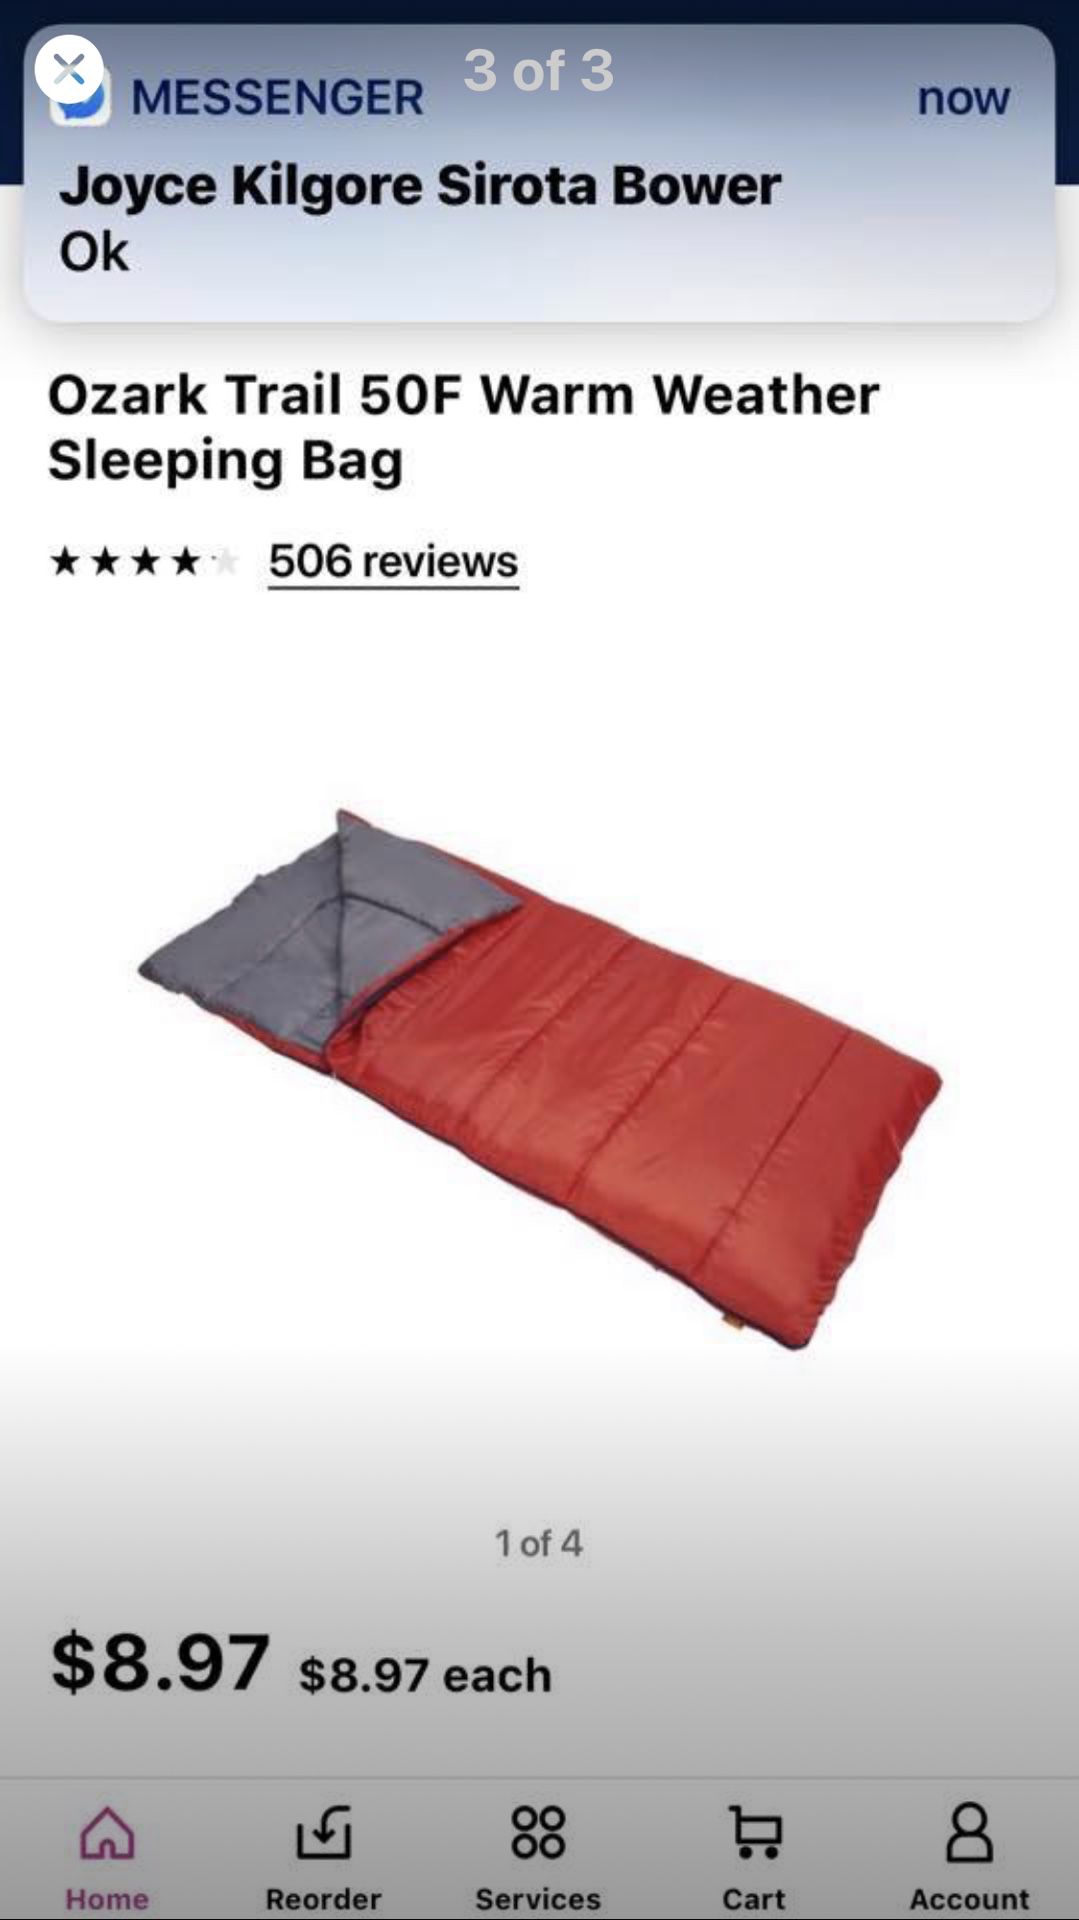 Brand new camping gear. Will accept best offer. No holds. No shipping or trades.